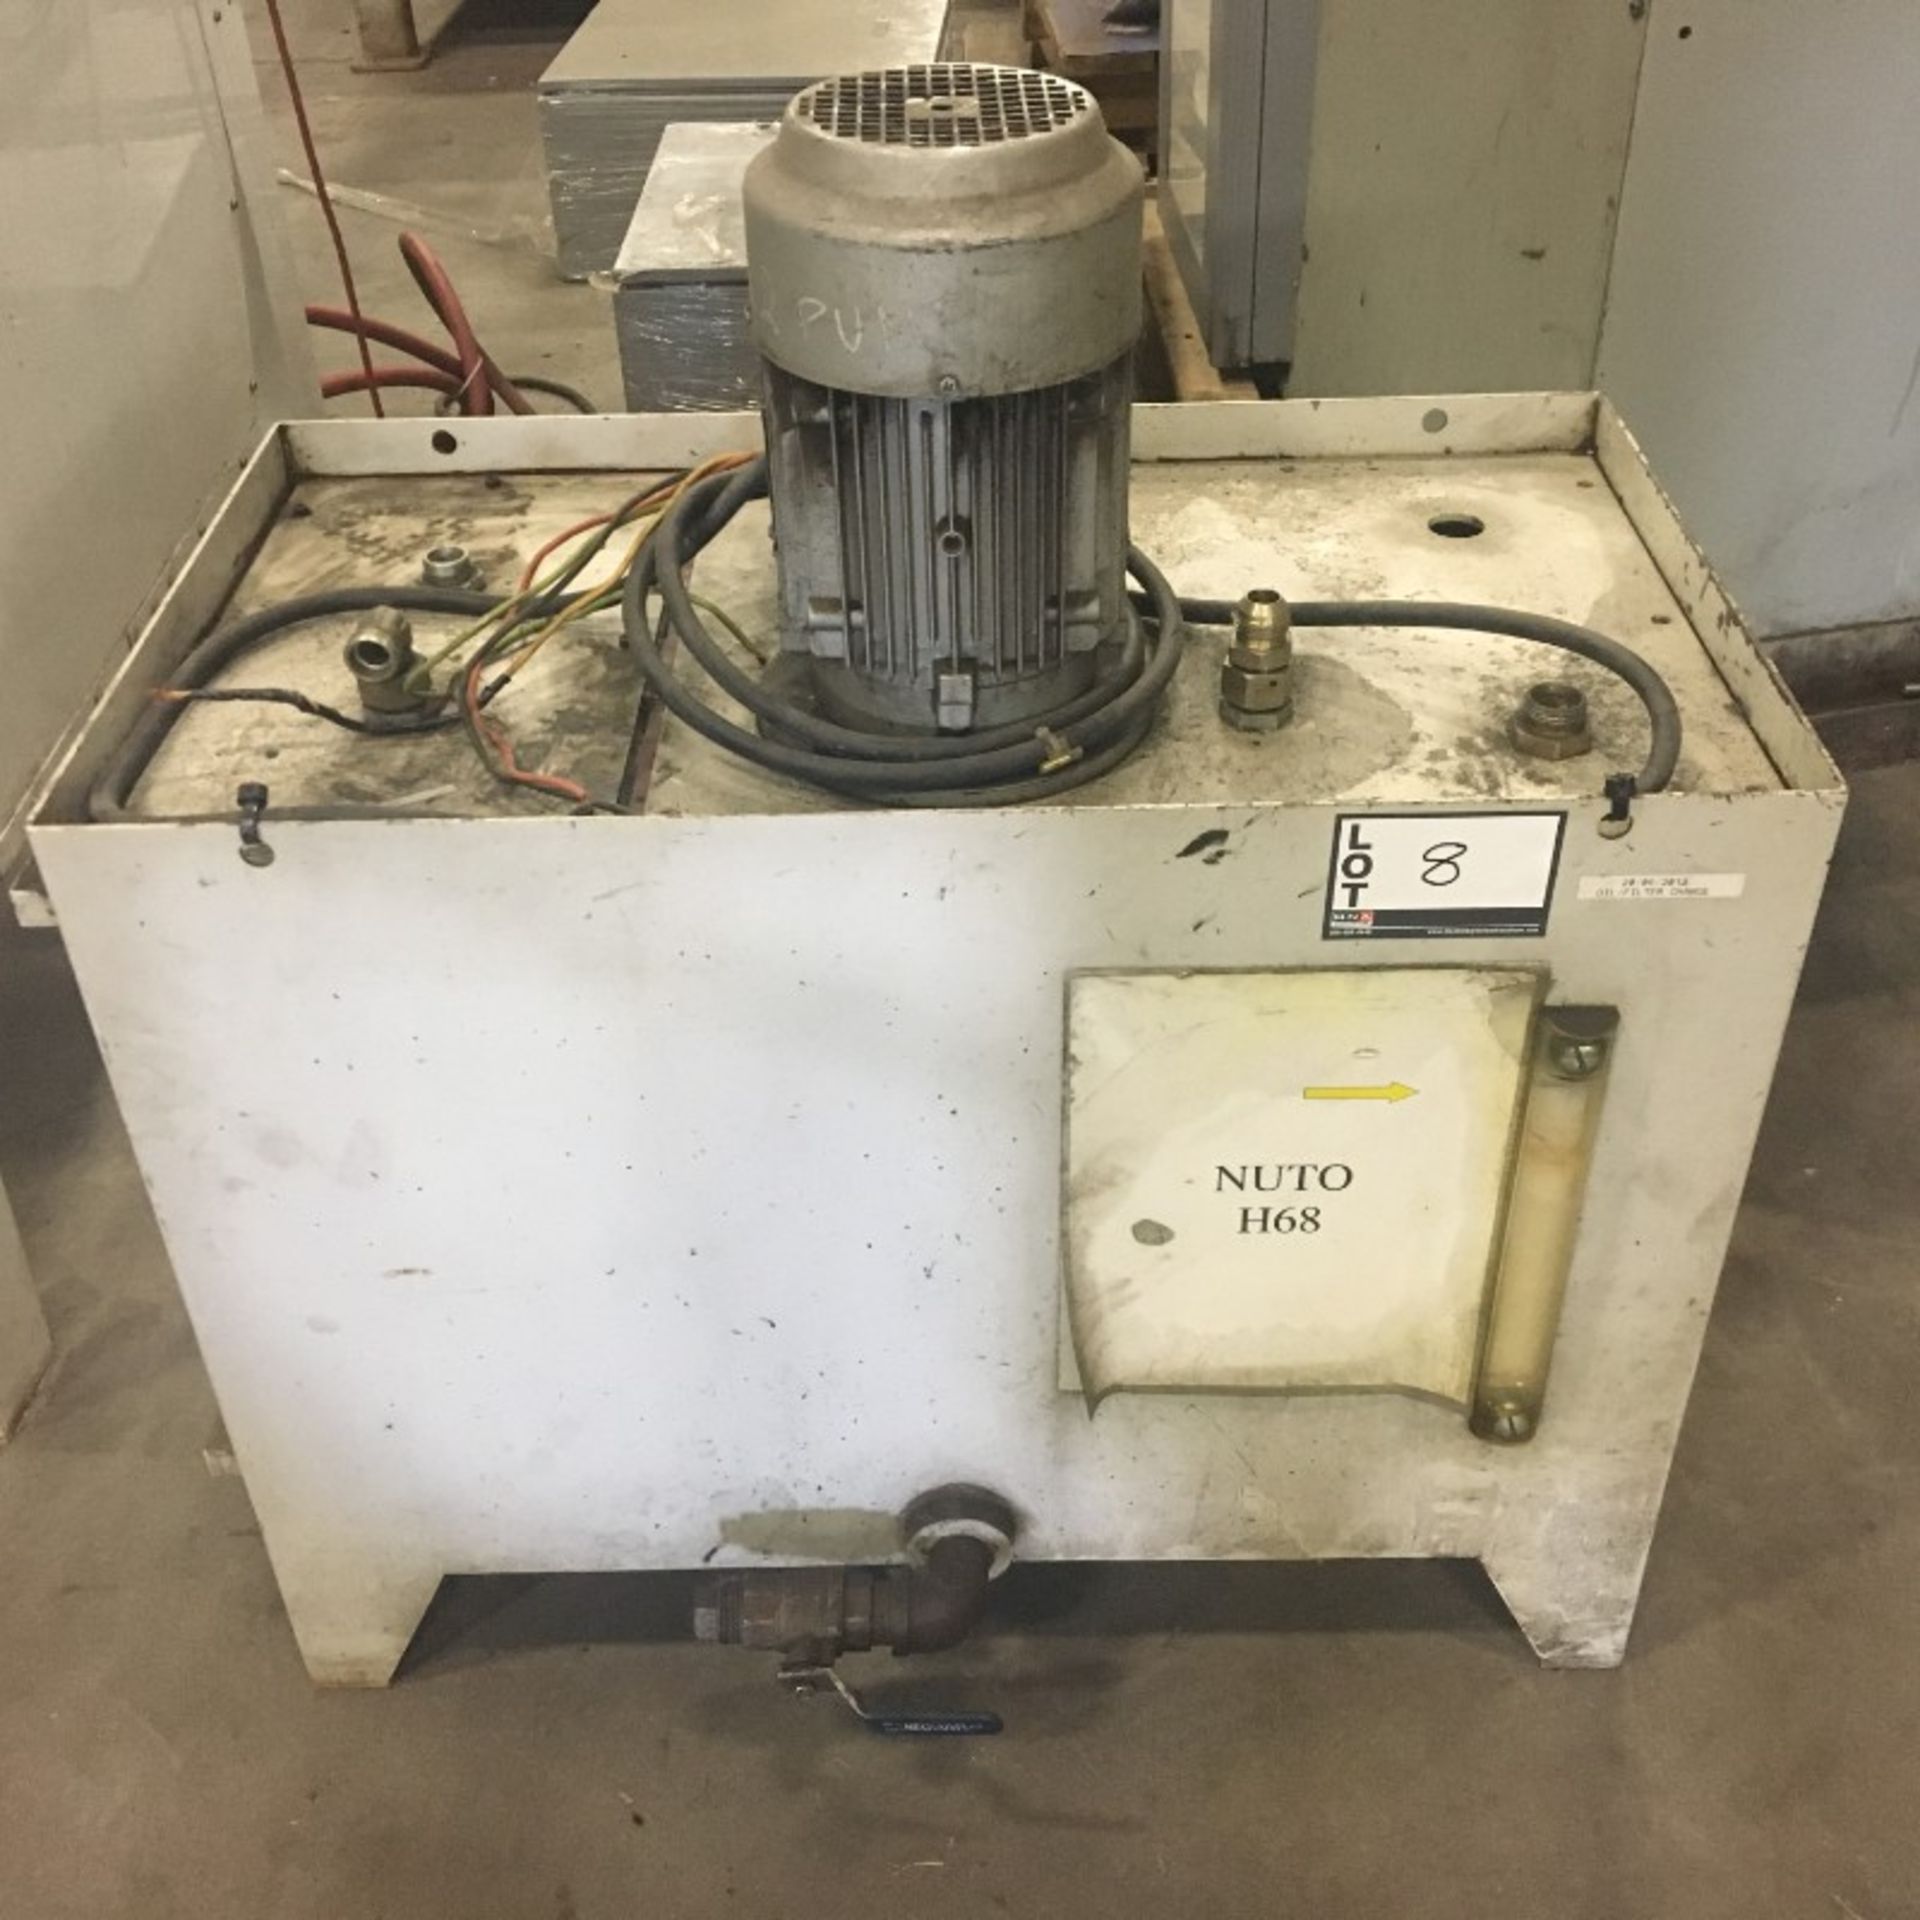 Hydraulic Tank with Baier & Koppell 1.5 HP pump